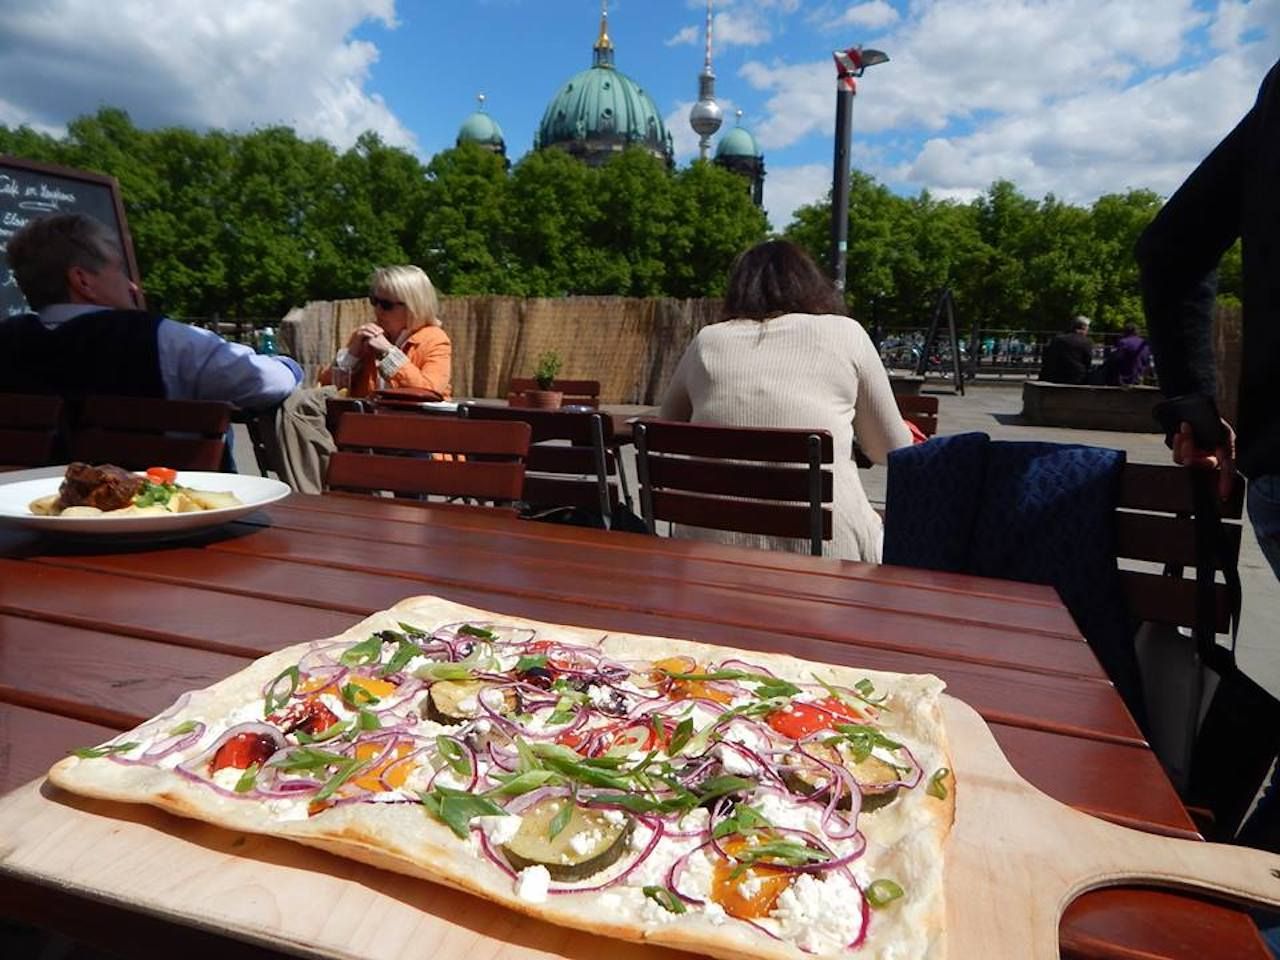 Table with flatbread pizza in front of Berlin landmark